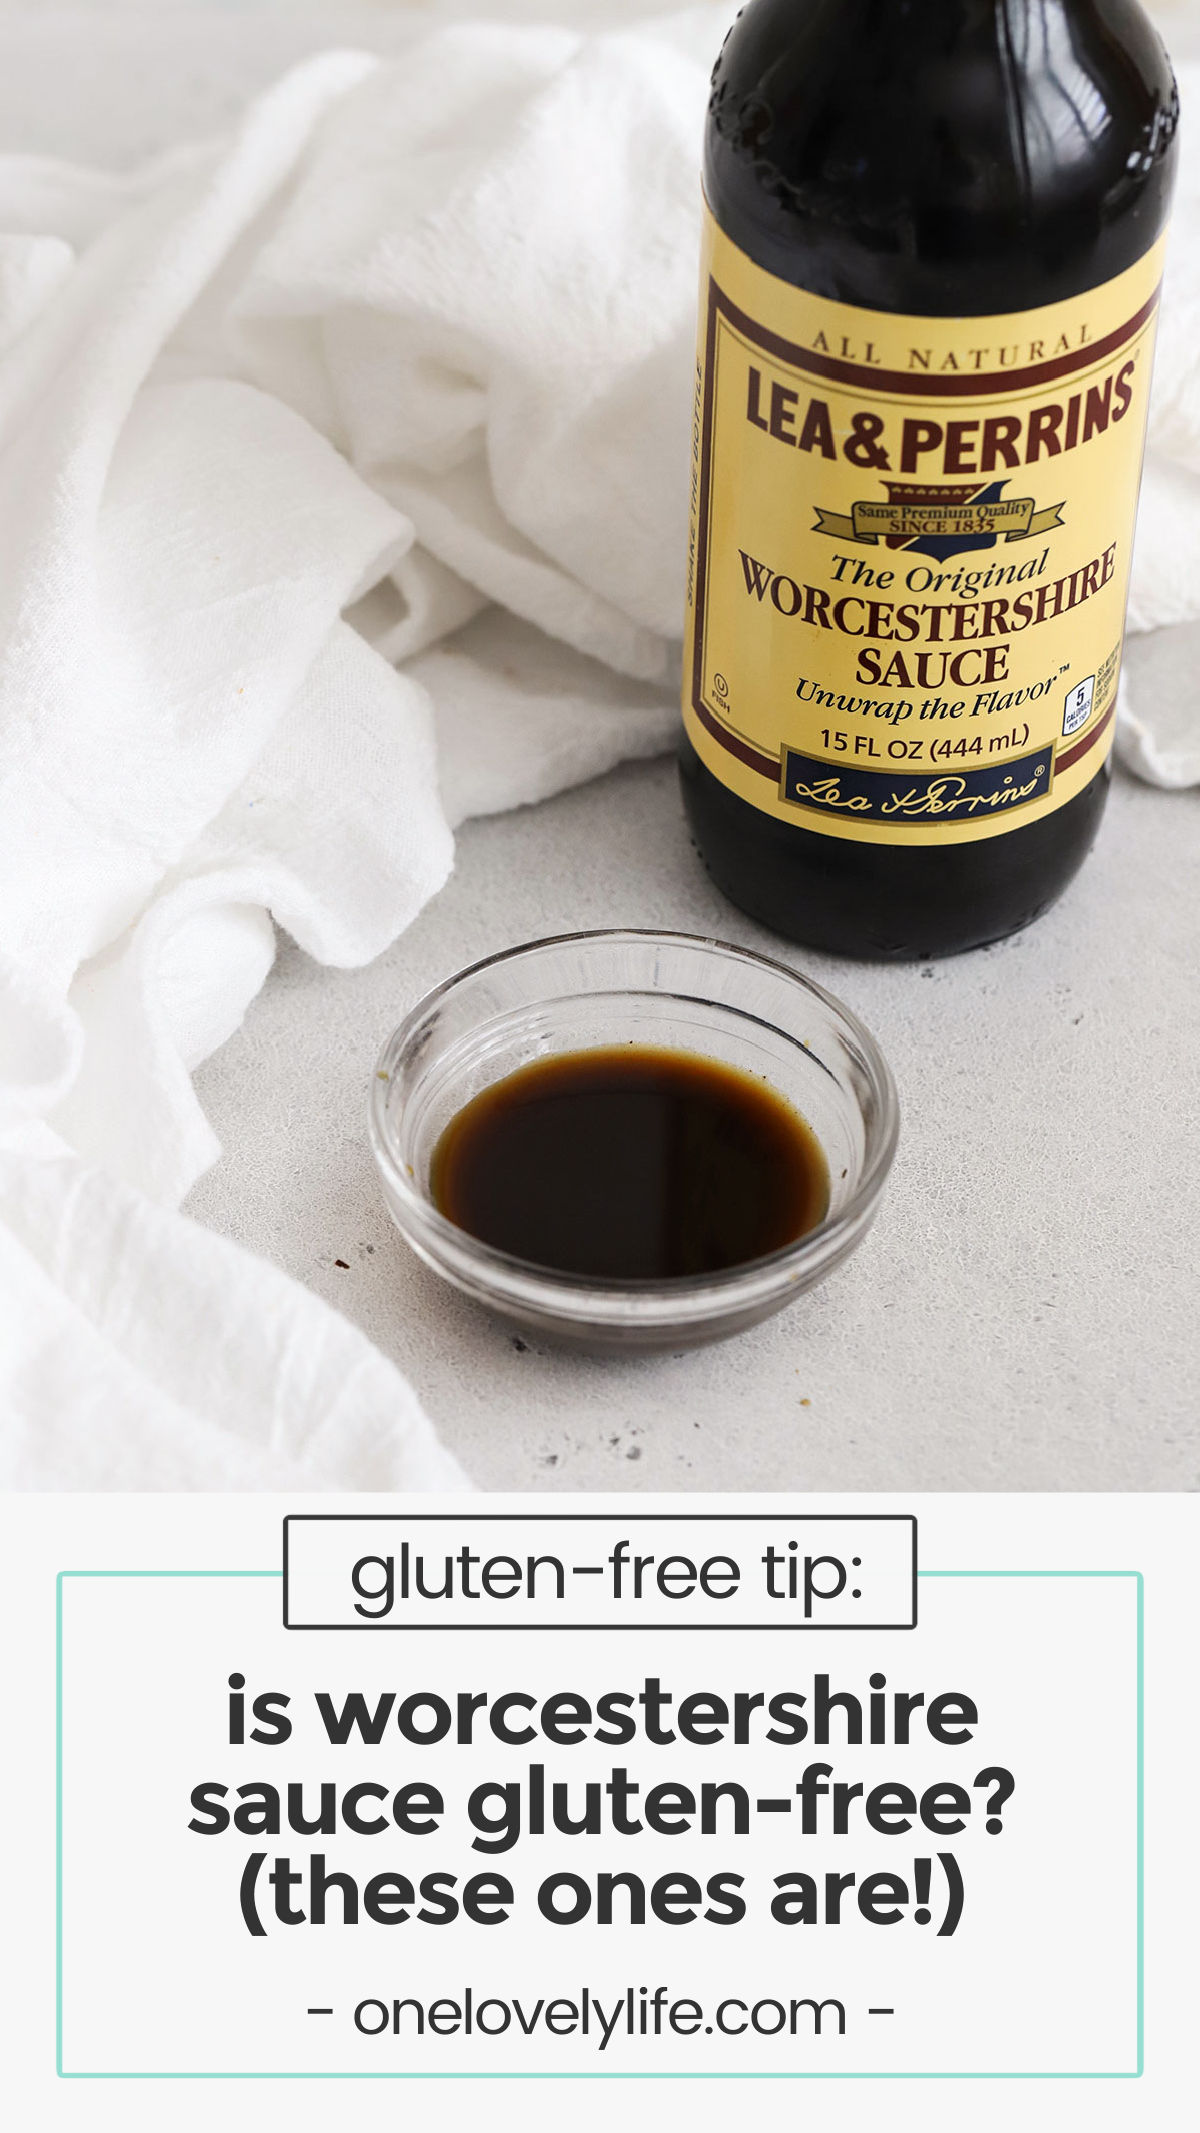 Is Worcestershire Sauce Is Gluten-Free? We're Sharing Brands Of Gluten-Free Worcestershire Sauce, Ingredients To Watch Out For & More! // gluten-free worcestershire sauce brands / gluten-free worcestershire / is lea & perrins gluten-free / is lea and perrins worcestershire sauce gluten-free / homemade gluten-free worcestershire sauce / gluten free tips /